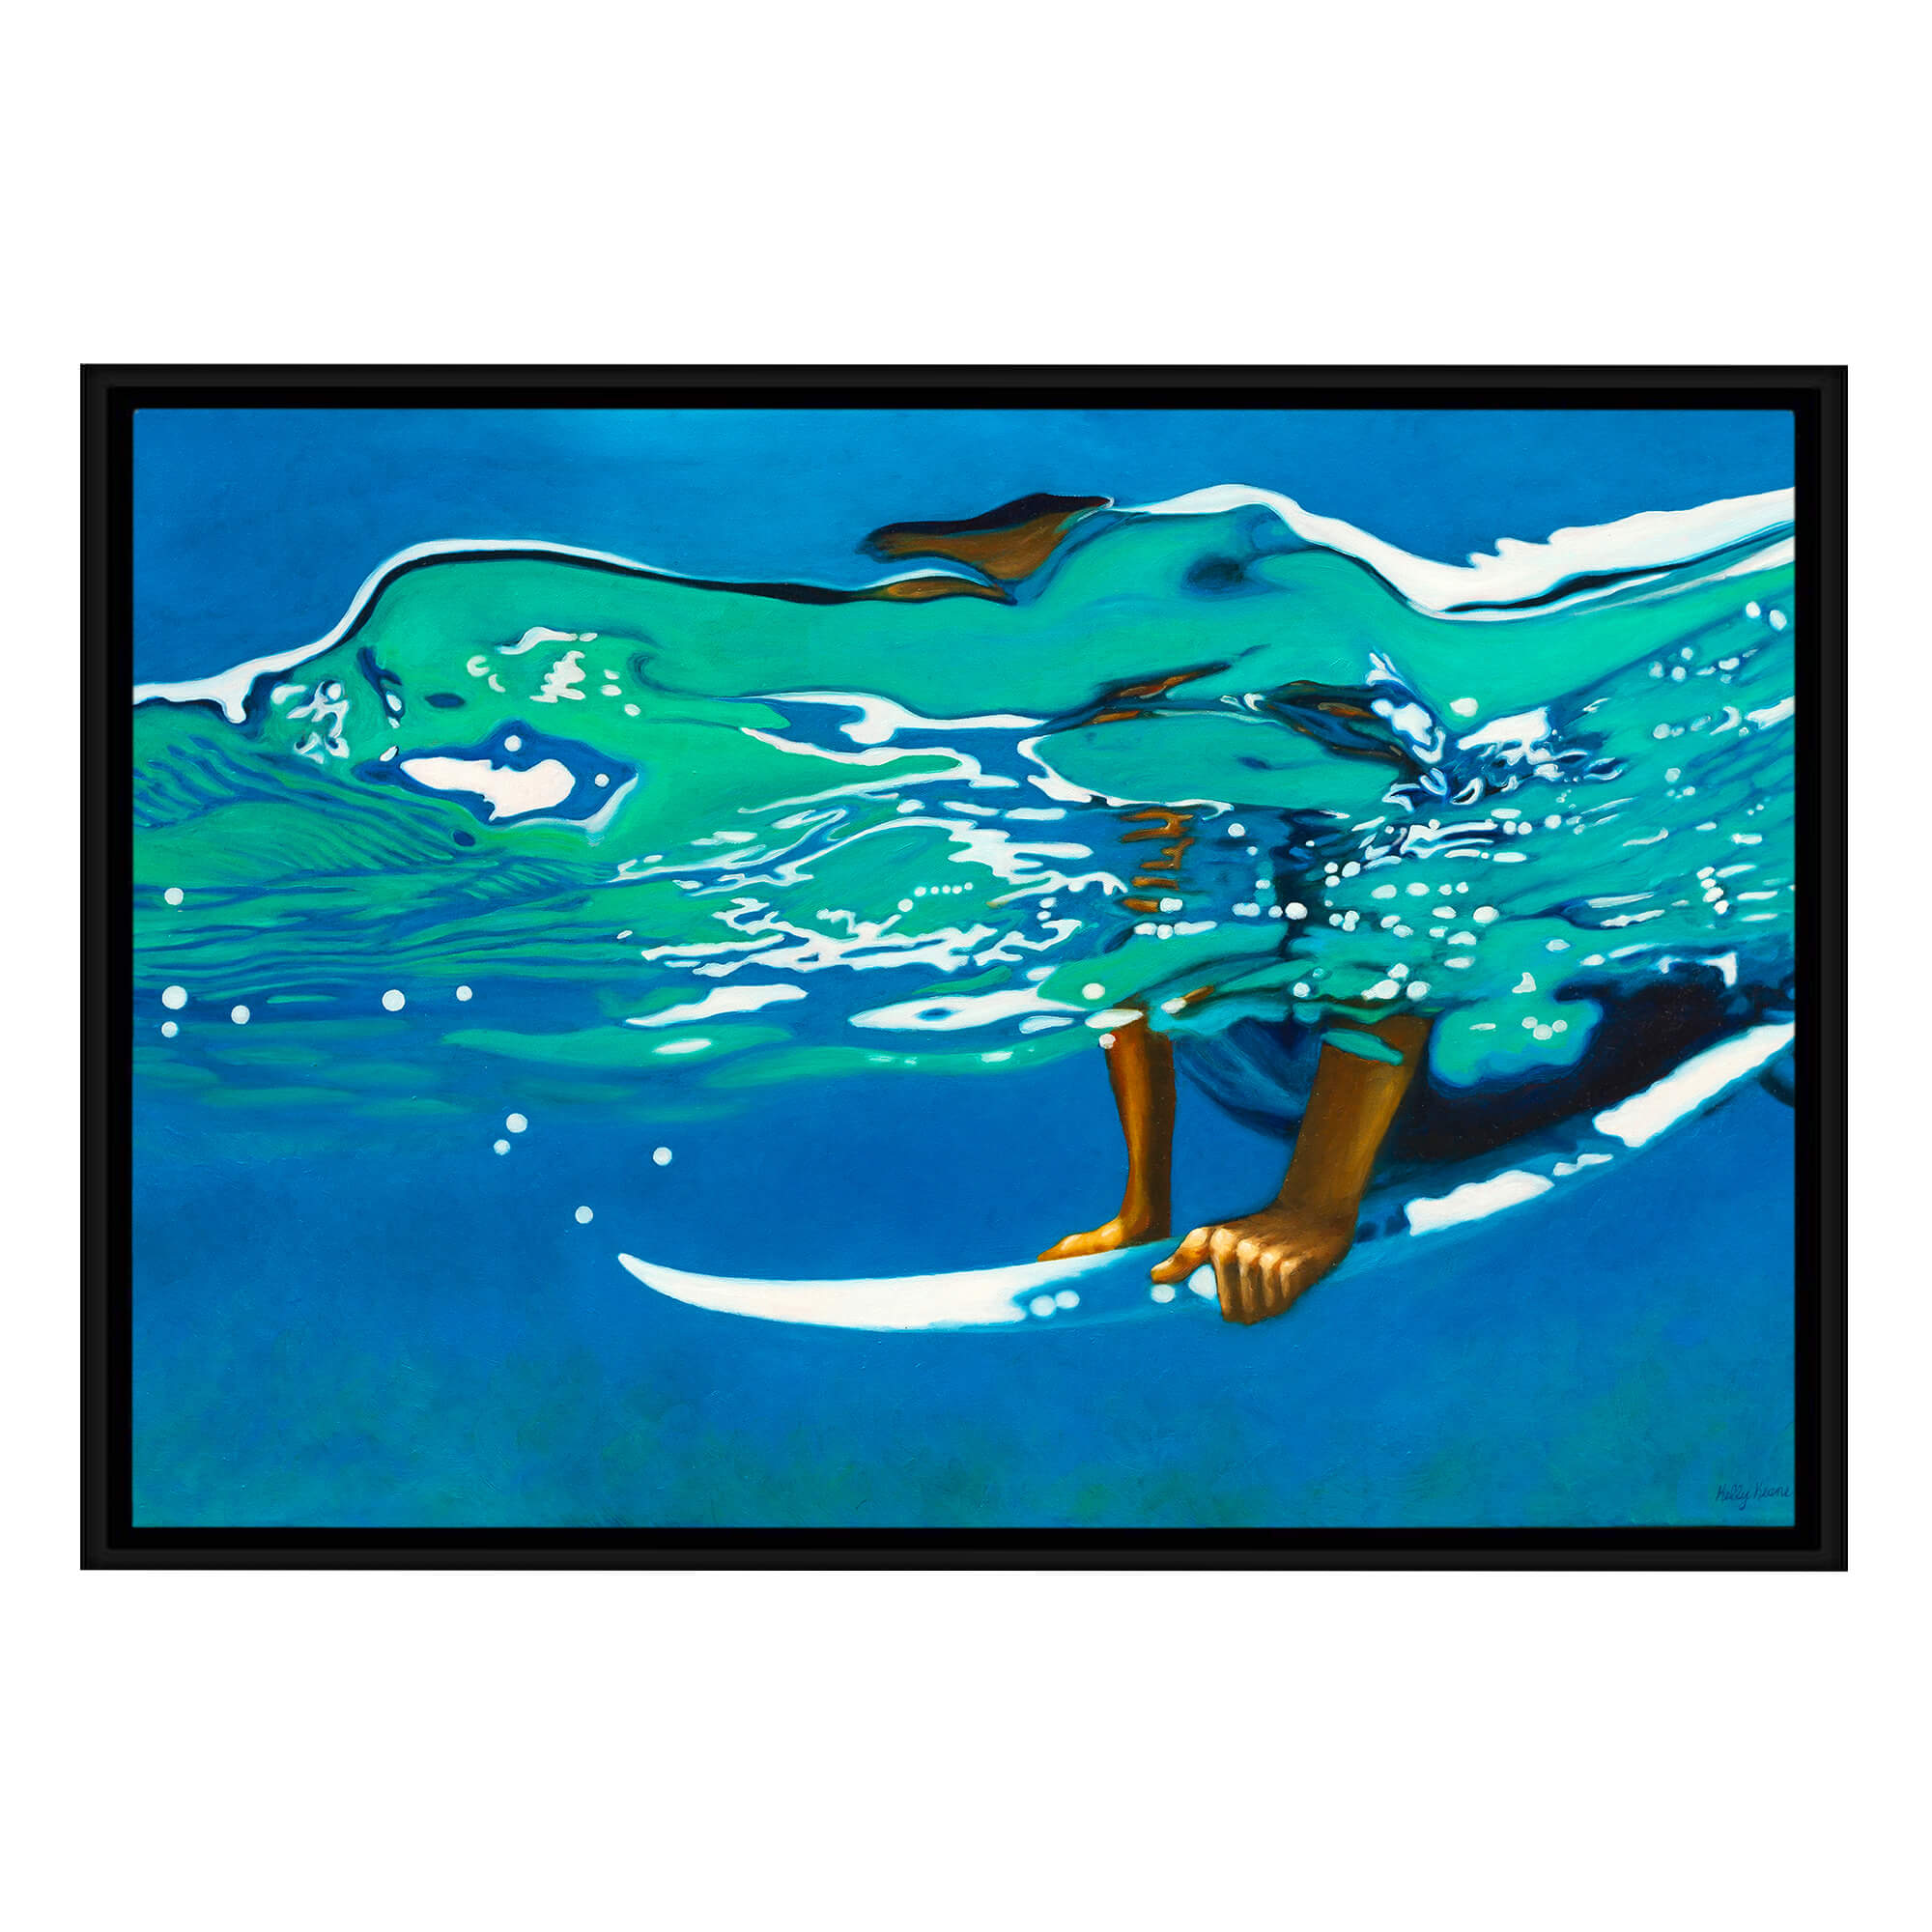 A canvas art print with black frame featuring a man surfing  by hawaii artist Kelly Keane